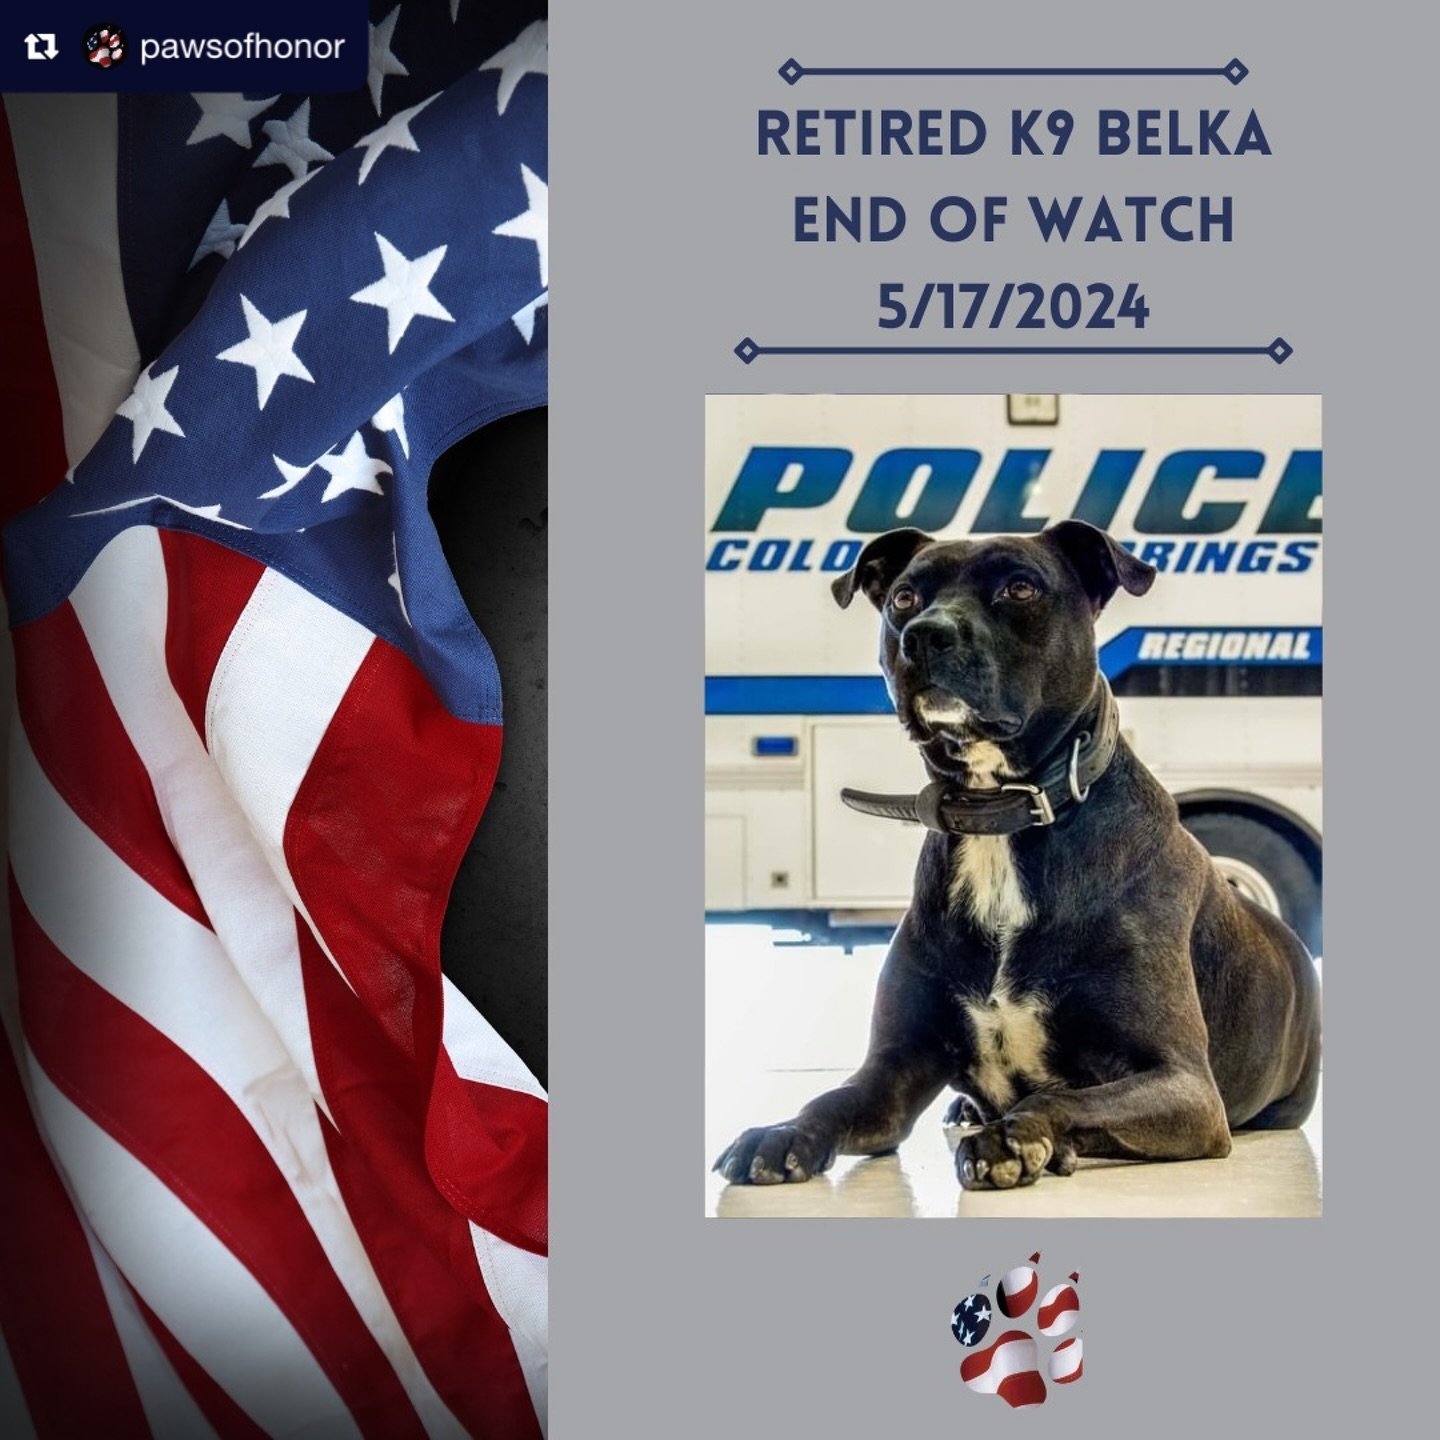 EOW K9 Belka 🇺🇸

K9 Belka passed peacefully surrounded by her loved ones on 5/17/2024.

Belka&rsquo;s owner had this to say:
&ldquo;K9 Belka served the Colorado Springs Police Department for almost a decade. She started the EOD K-9 unit. During her